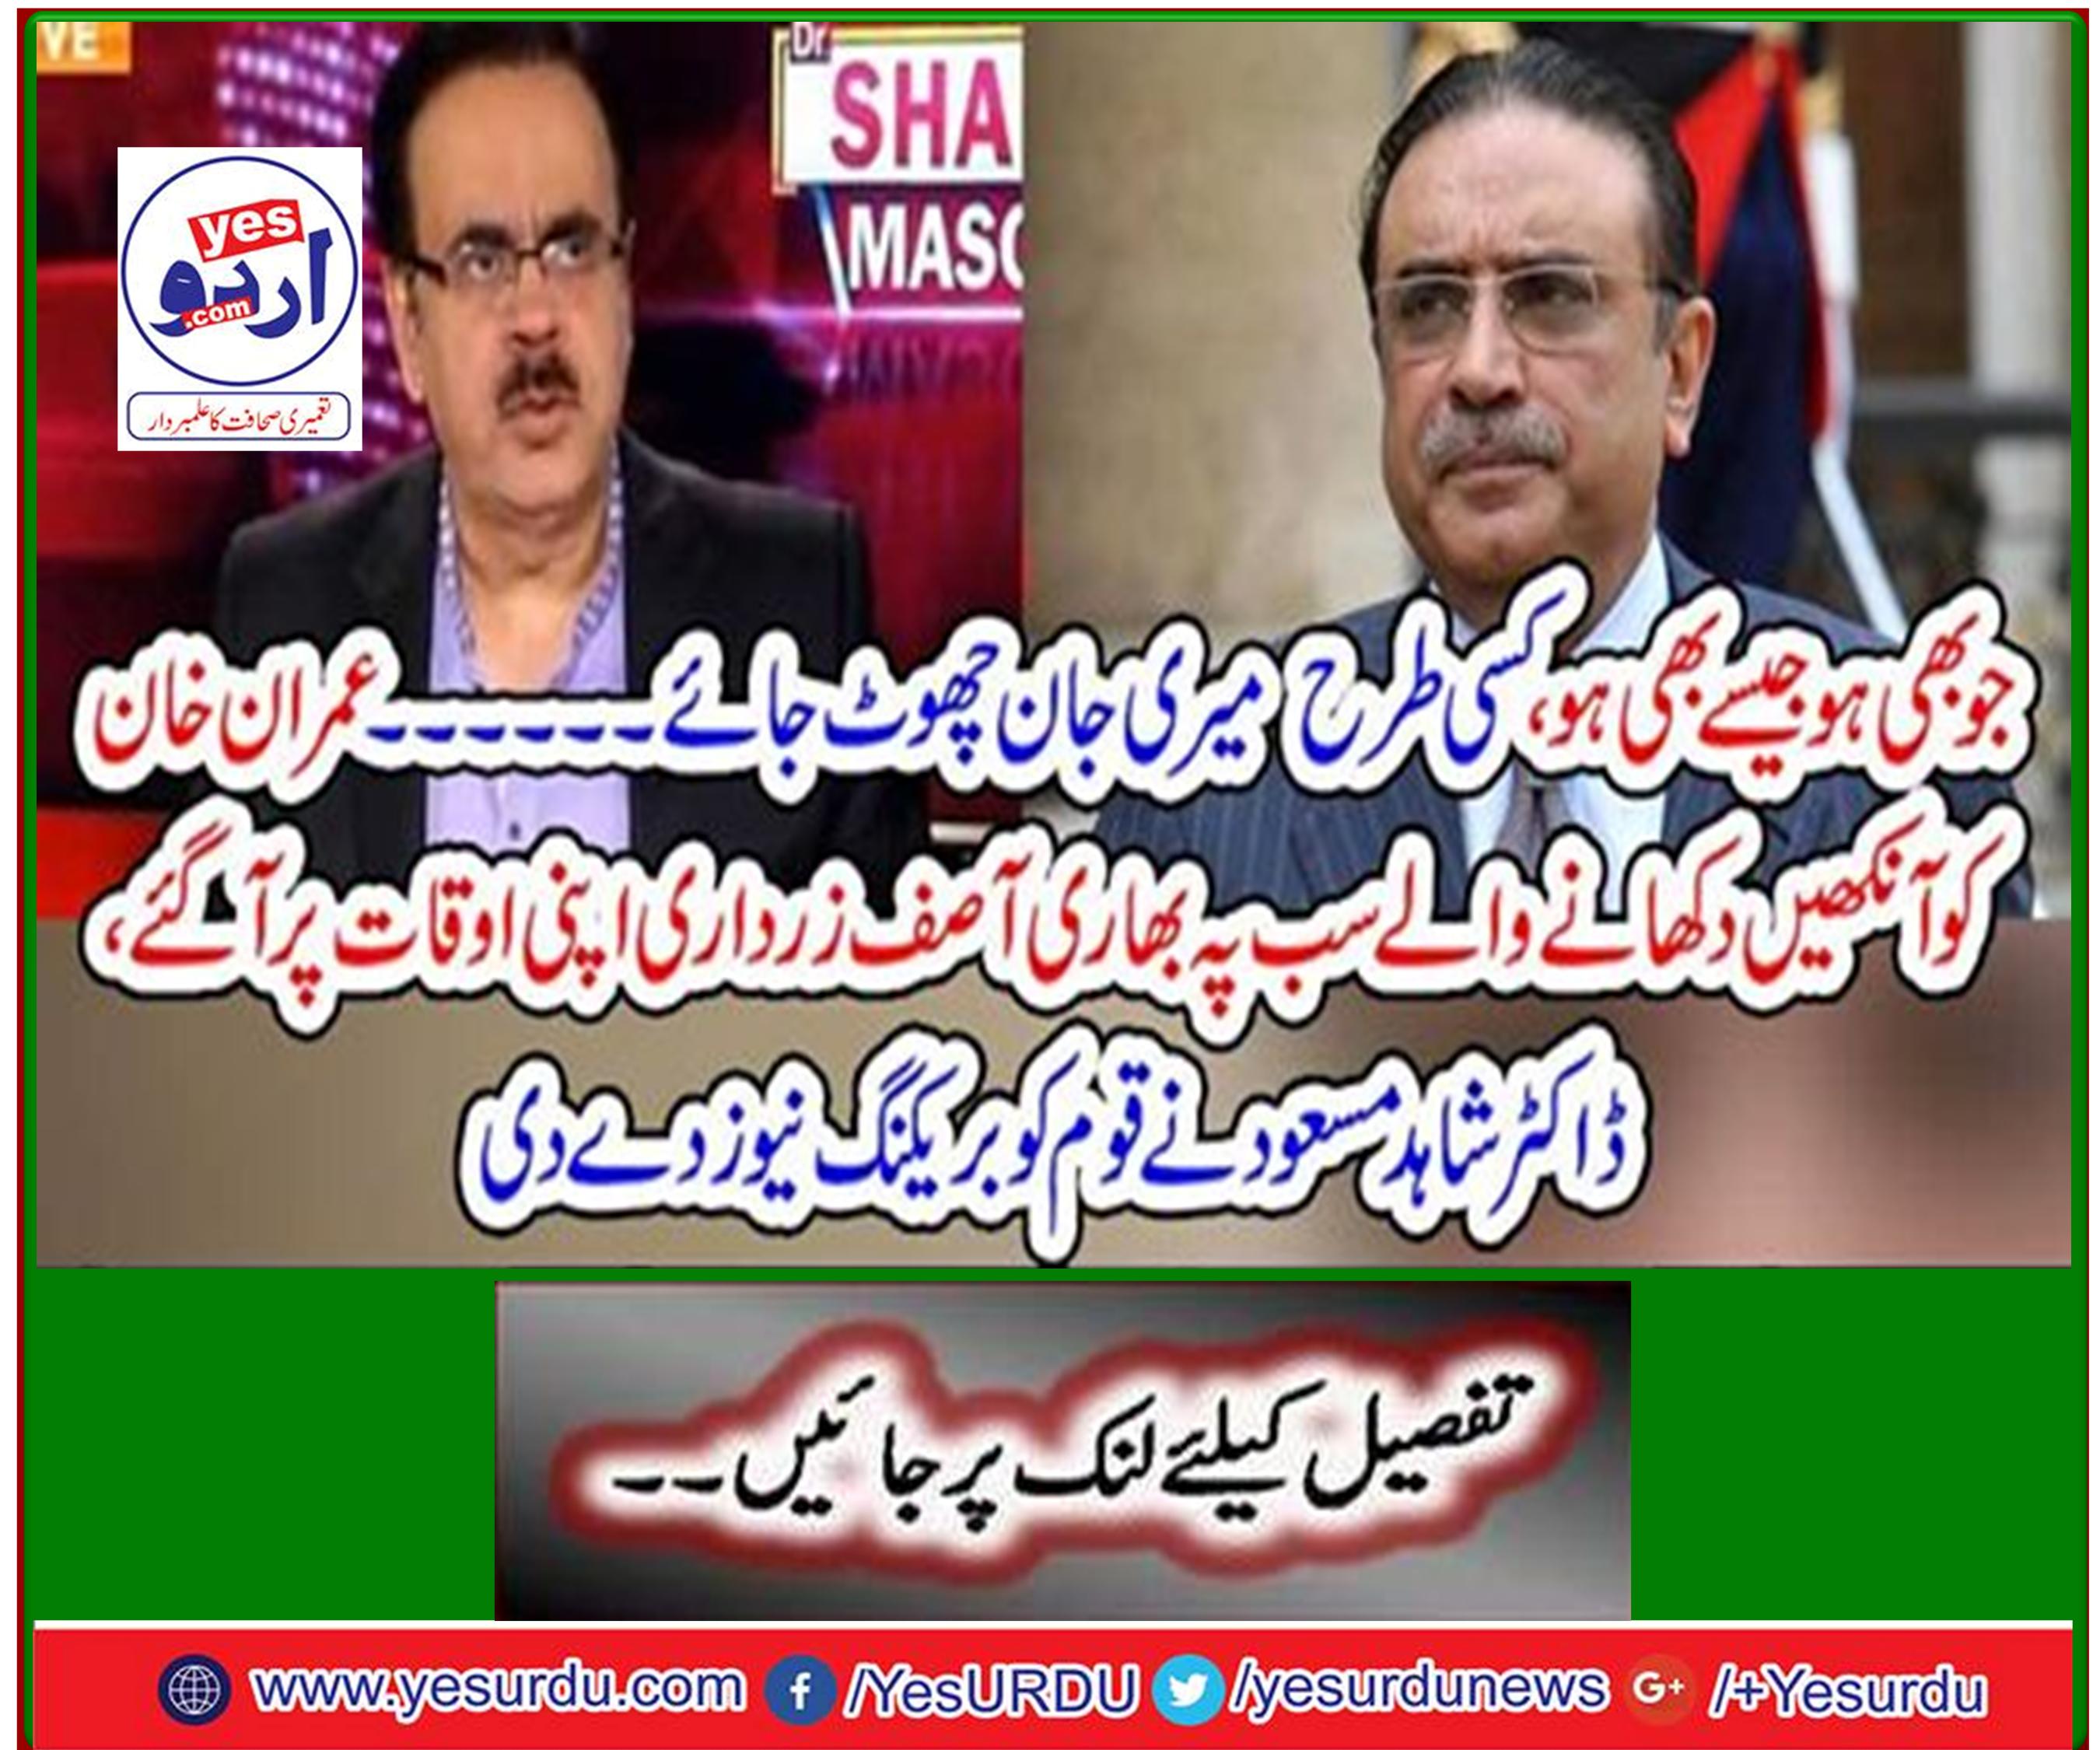 Asif Zardari arrives at his times with eyes on Imran Khan, Dr Shahid Masood gives breaking news to the nation